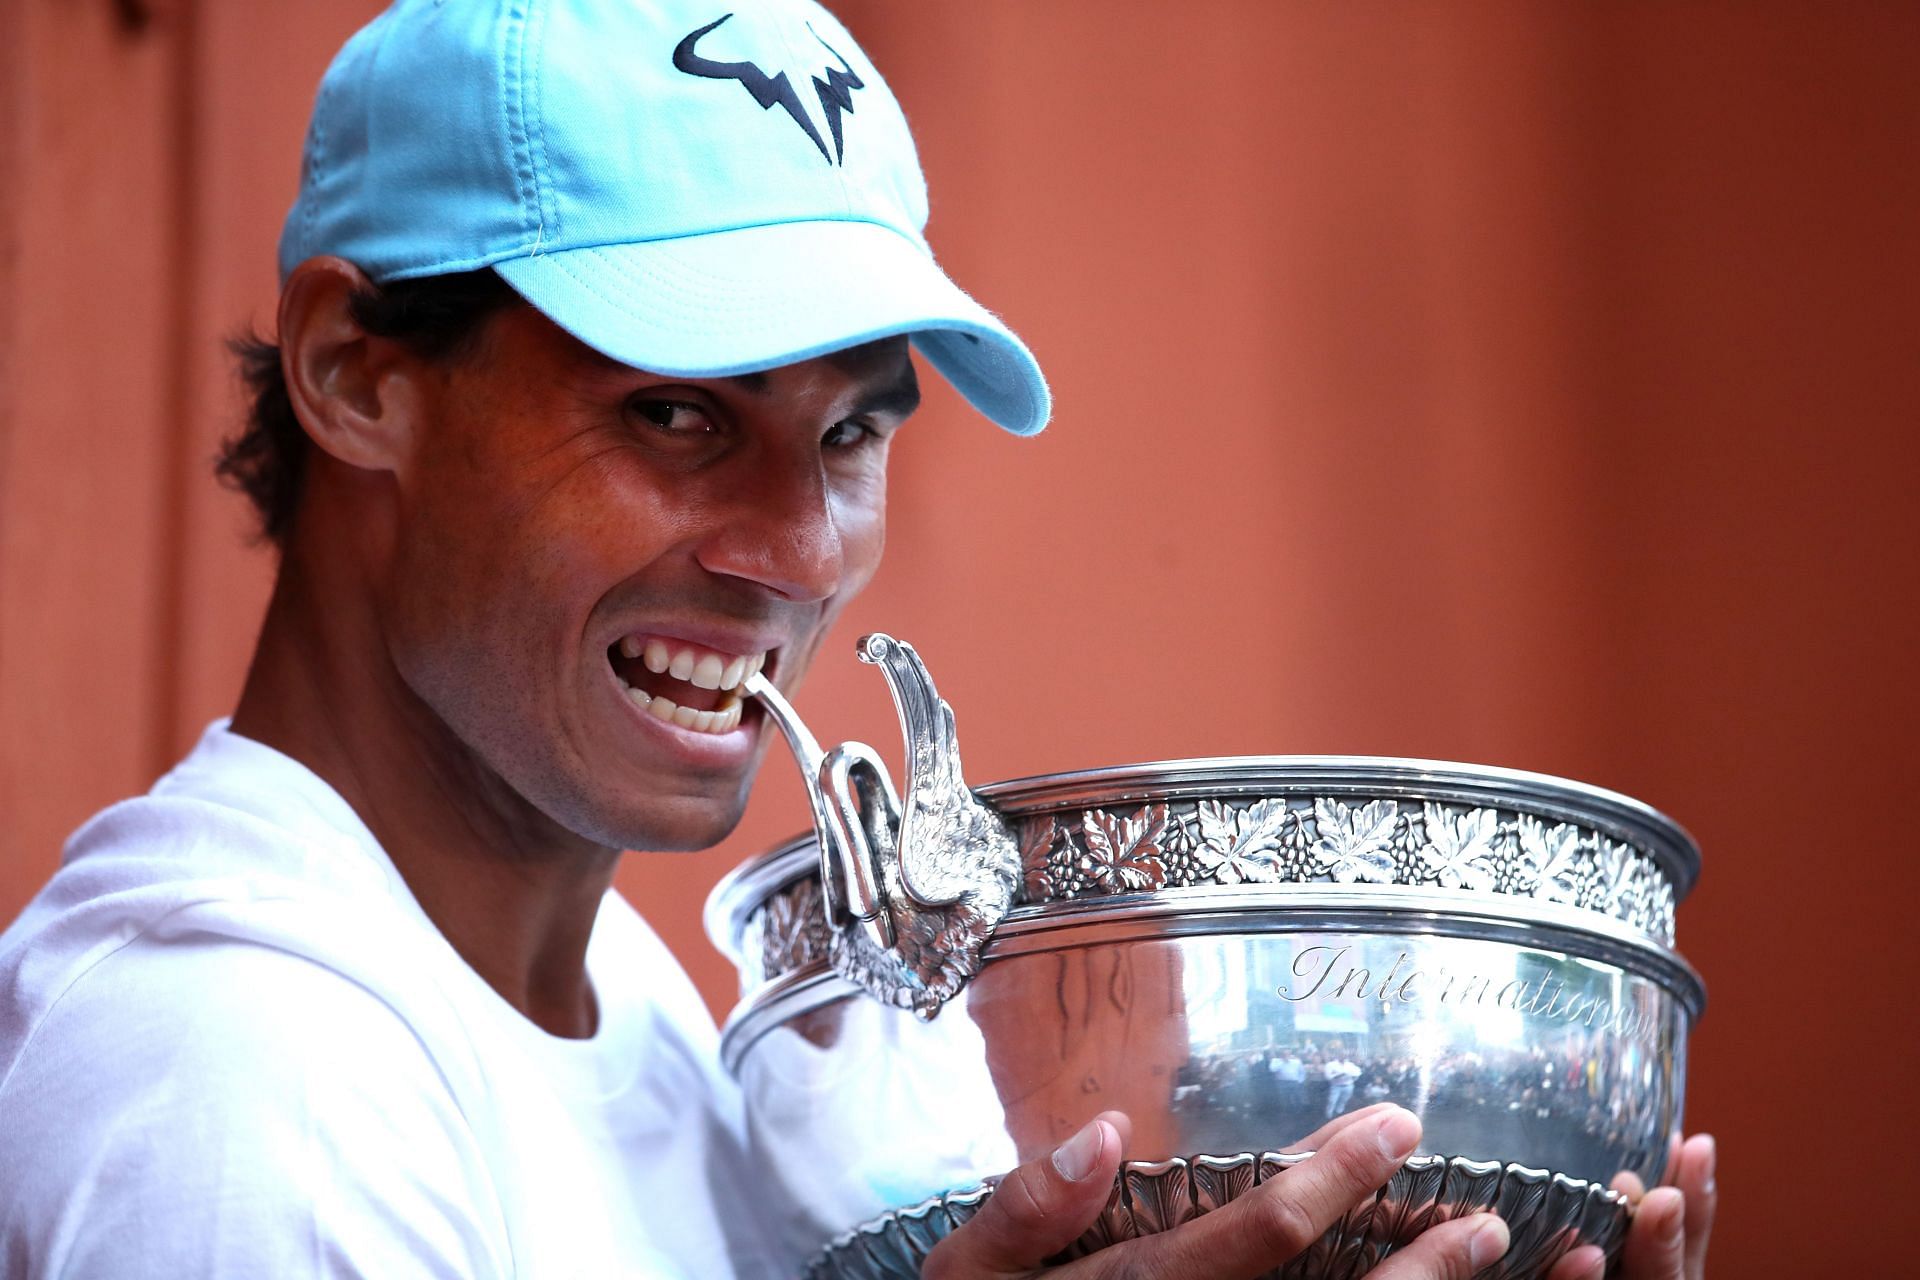 Rafael Nadal after winning the 2018 French Open